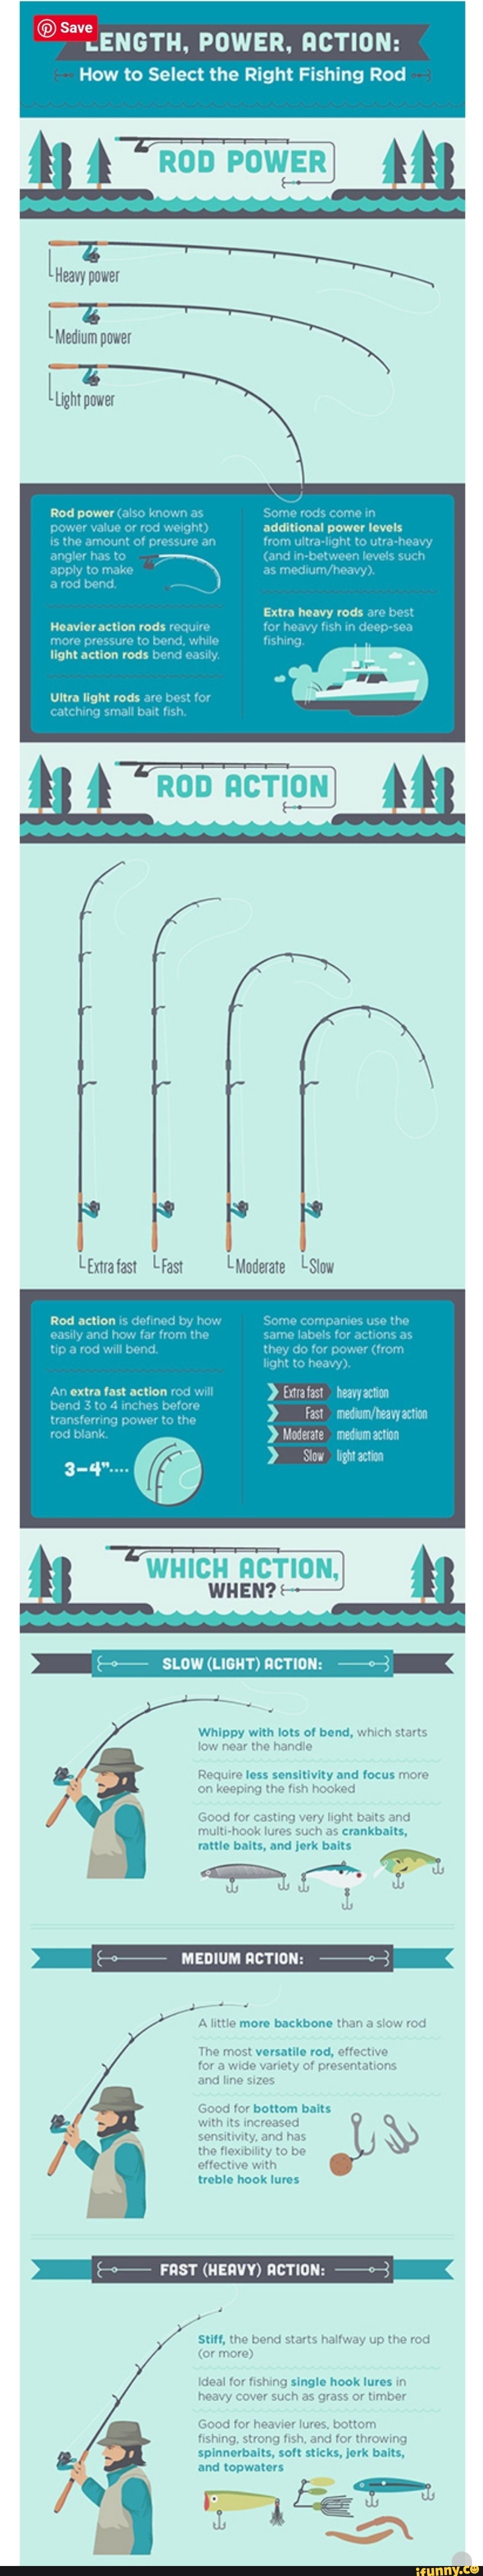 Save POWER, ACTION: How to Select the Right Fishing Rod ROD POWER power  power Light power